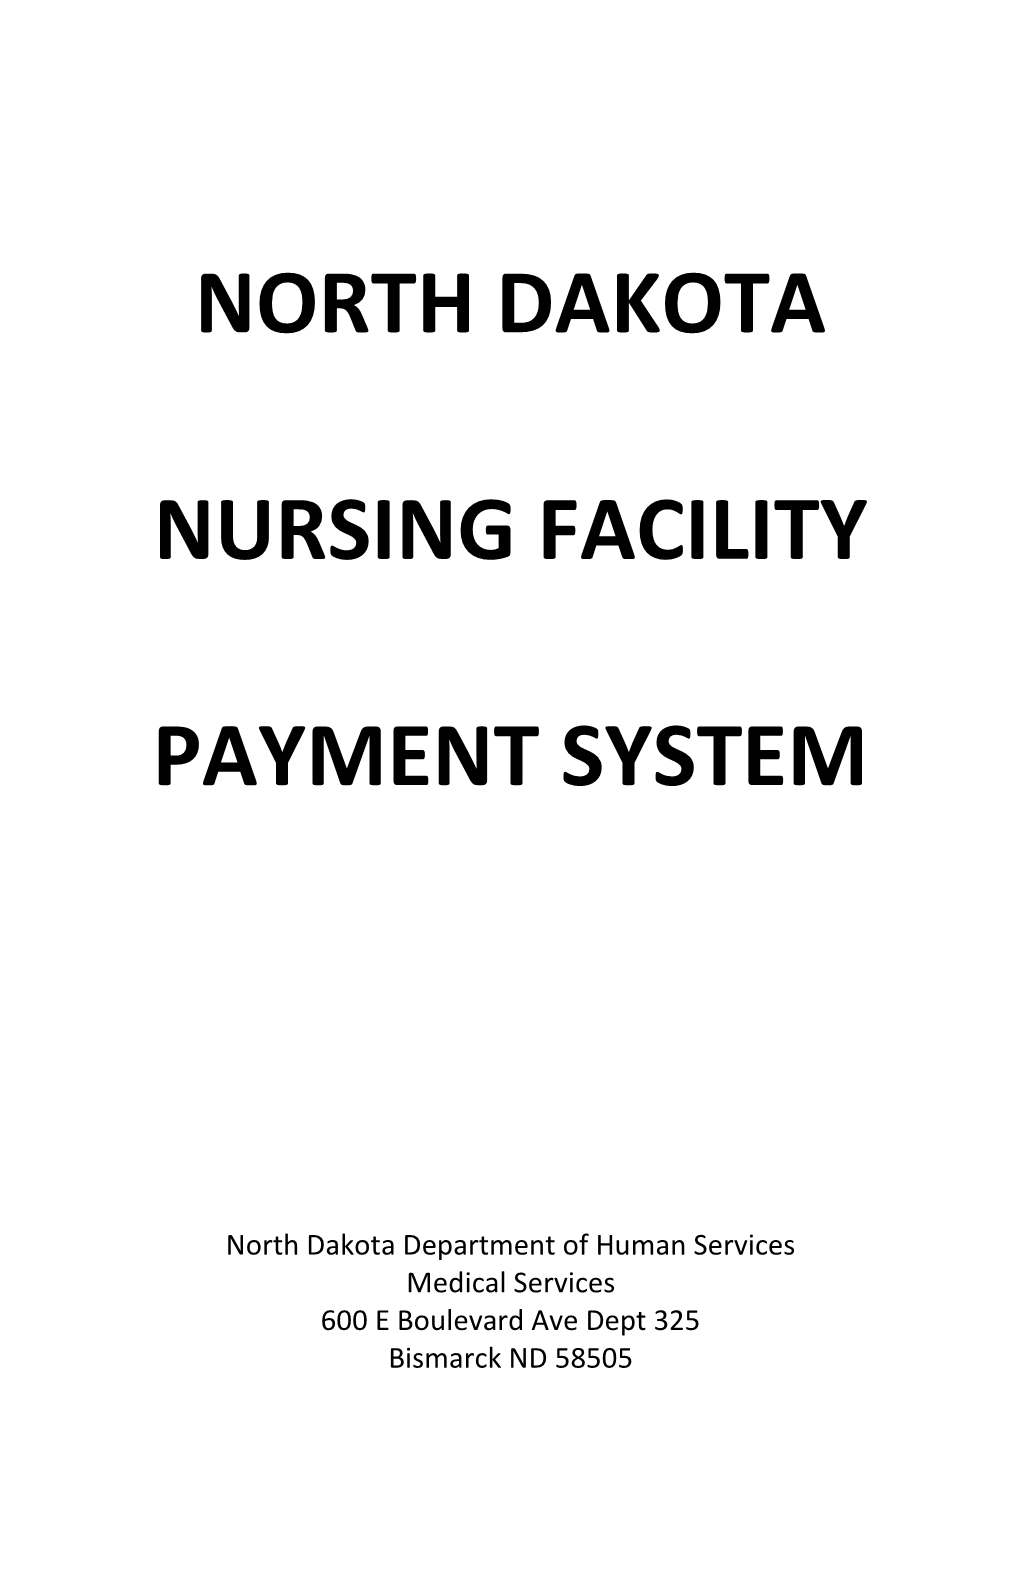 ND Nursing Facility Payment System Booklet